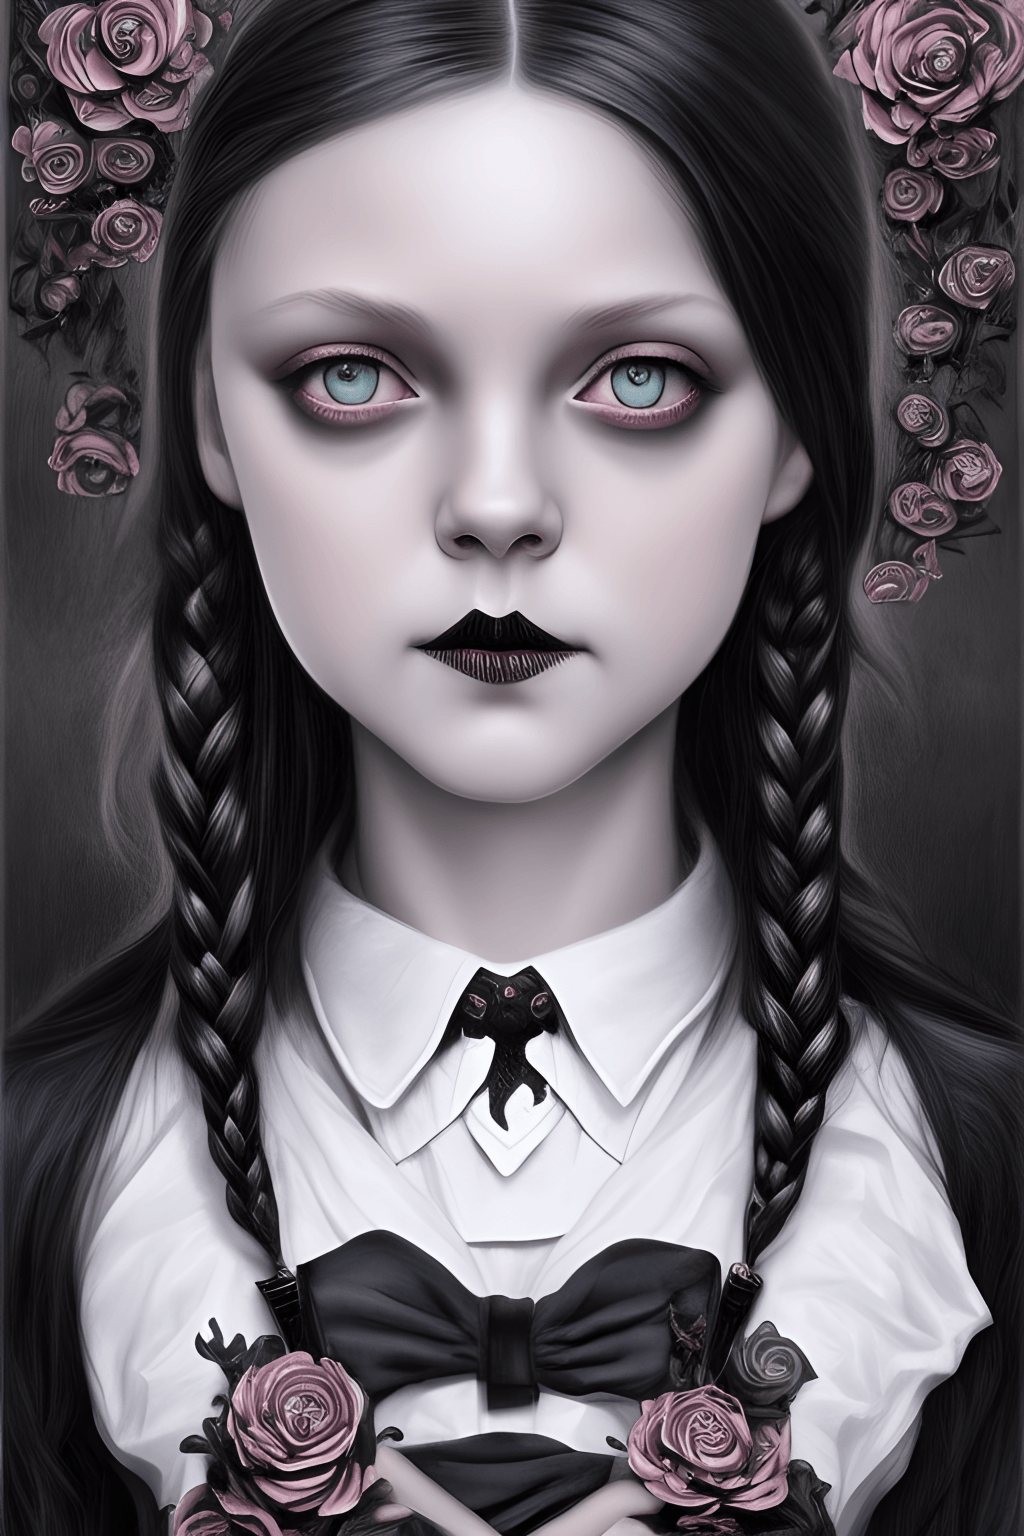 Beautiful Wednesday Addams in School Uniform by Charlie Bowater ...